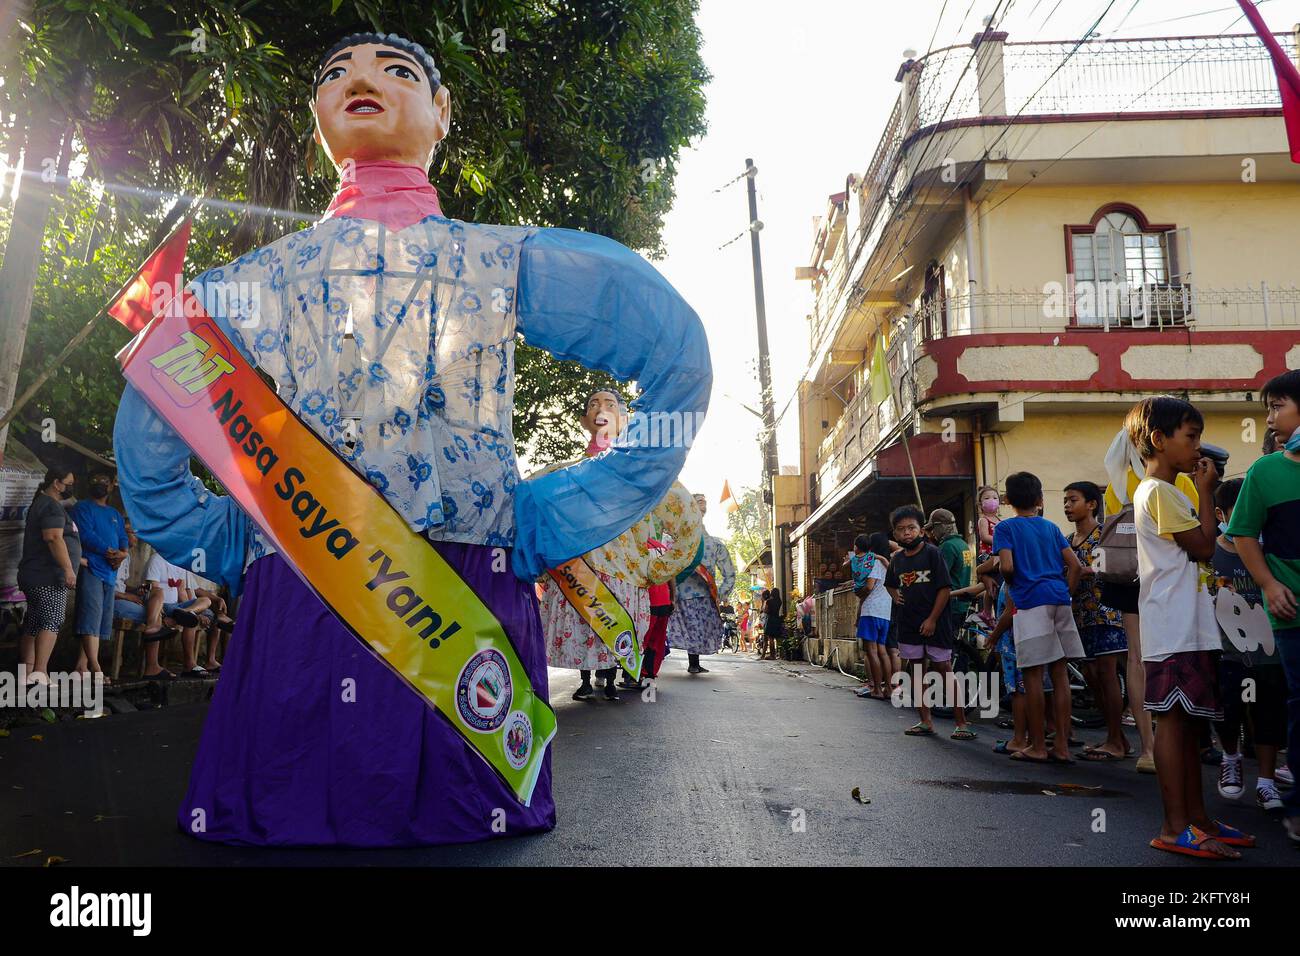 Angono, Rizal, Philippines. 20th Nov, 2022. The parade of the giant puppets in the art capital of the Philippines is back after two years of pandemic. The Higantes (giant) Festival parades the streets of Angono, Rizal province. The paper mache head puppets were originally done to put to shame corrupt officials during the Spanish rulership. Now, the Higantes came a long way and evolve into a festival on modern times from the Spanish era. The festival brings joy and entertainment to the town people of Angono and to tourists. Now, they wear a sash to represent someone or promote something with Stock Photo